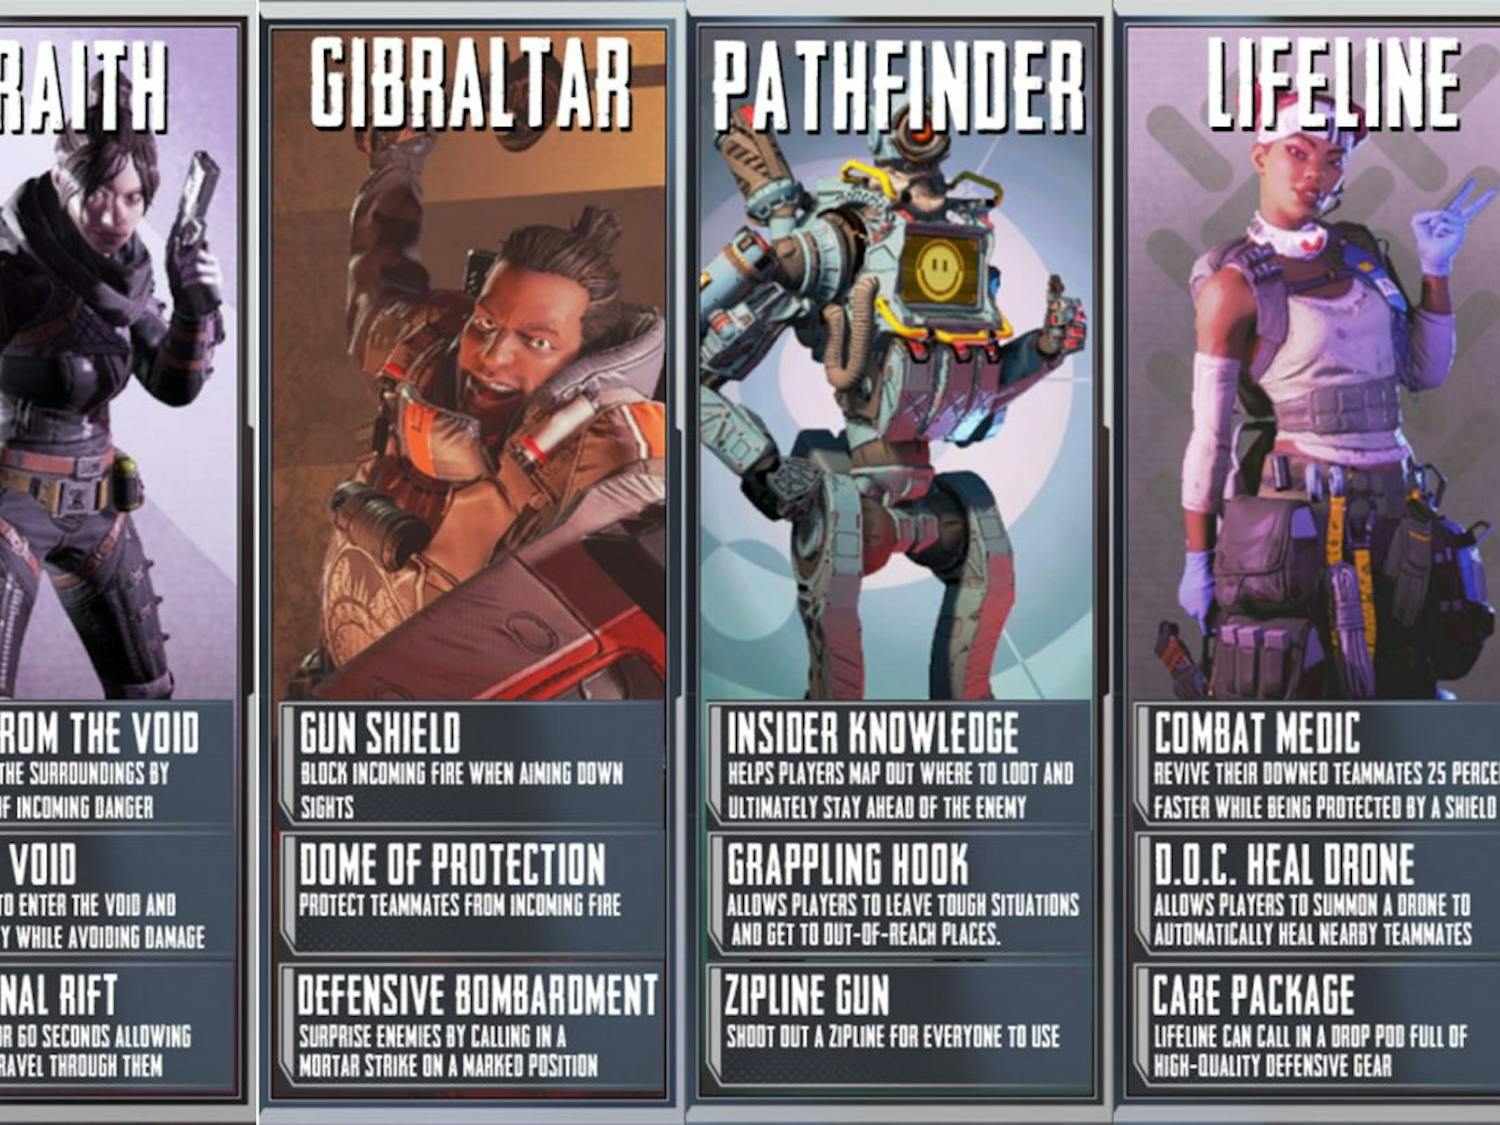 Apex Legend players can choose from these eight legends, each listed with their three abilities, to play as.